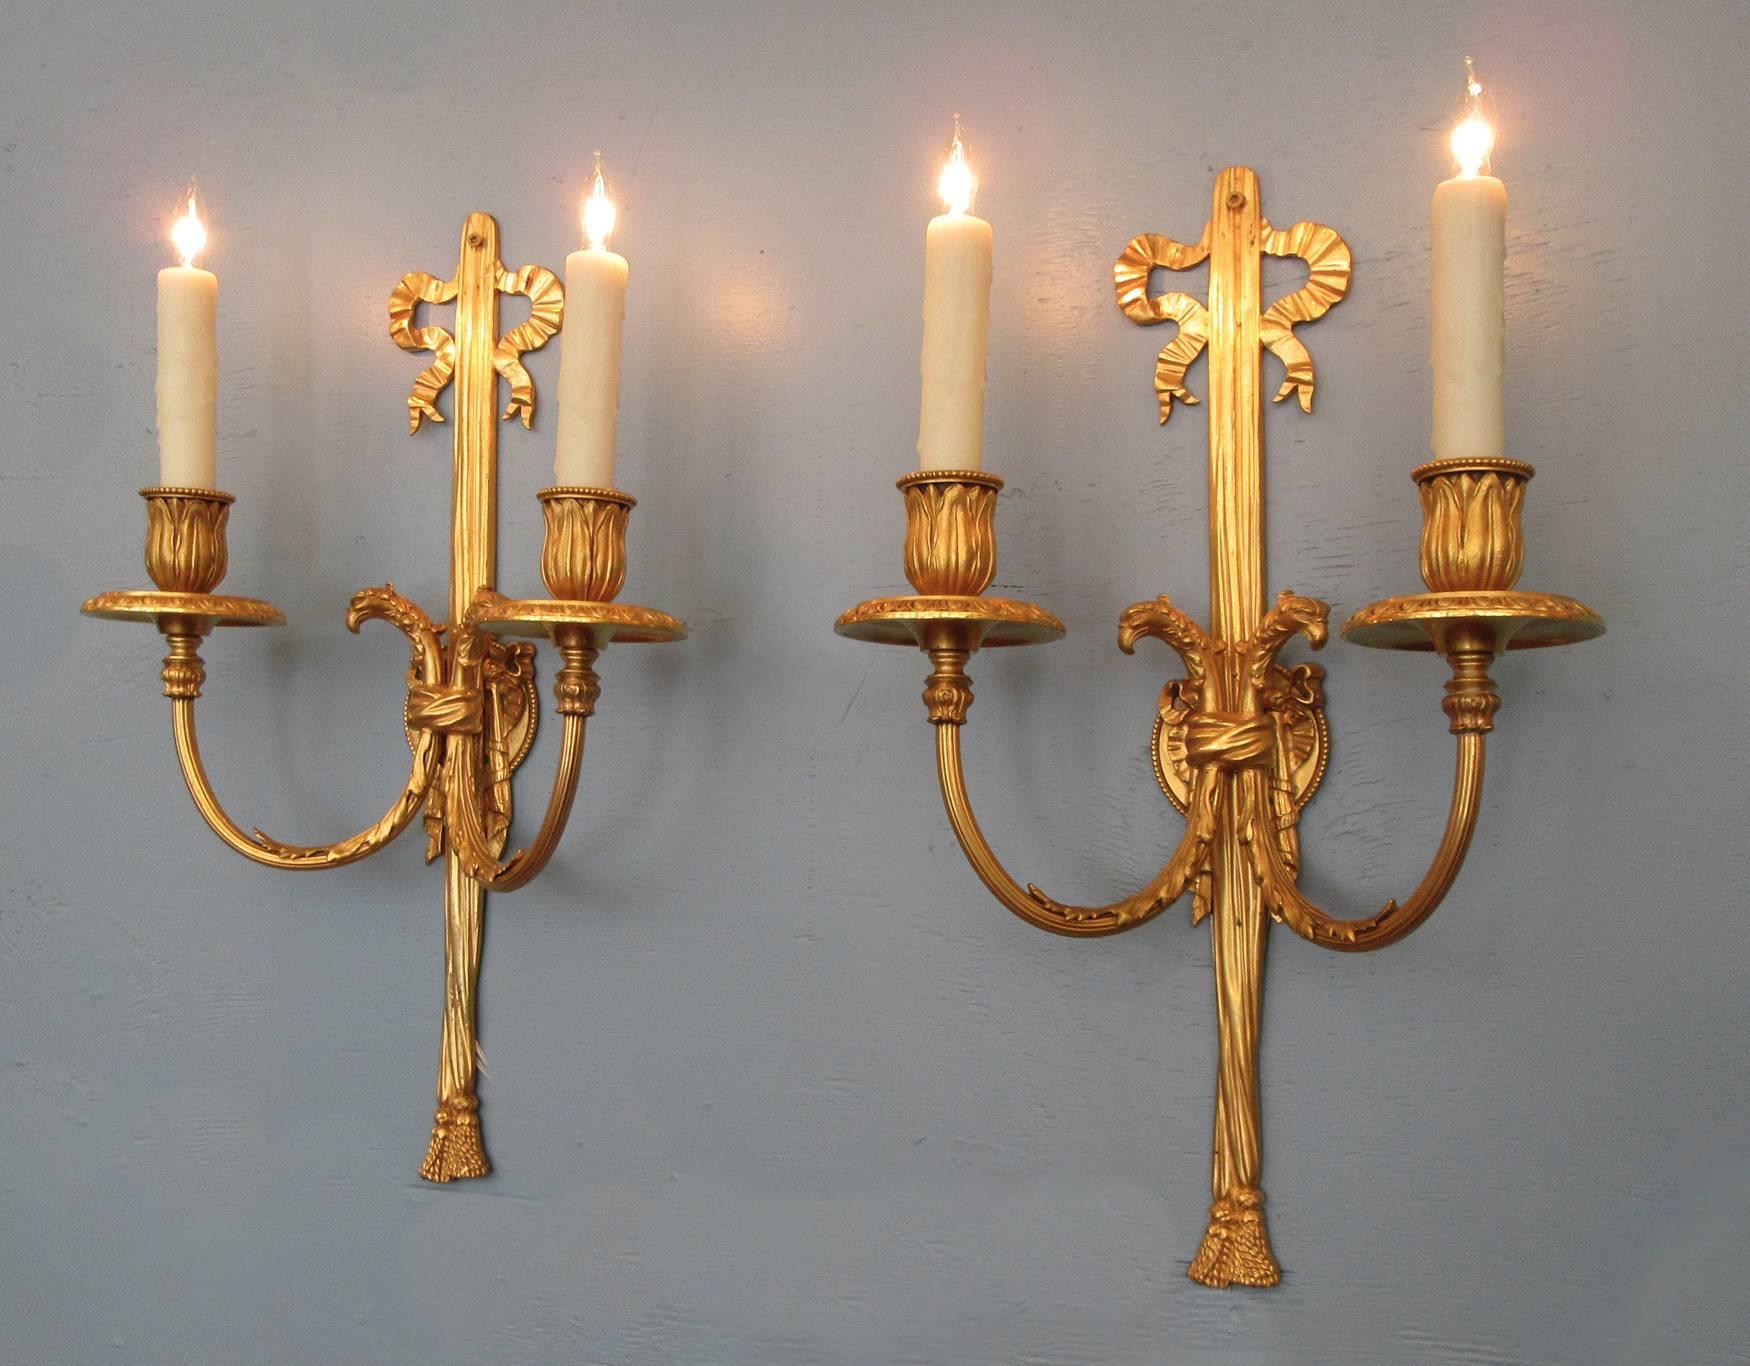 American Early 20th Century, New York Regence Style Bronze Dore Sconces by Caldwell & Co